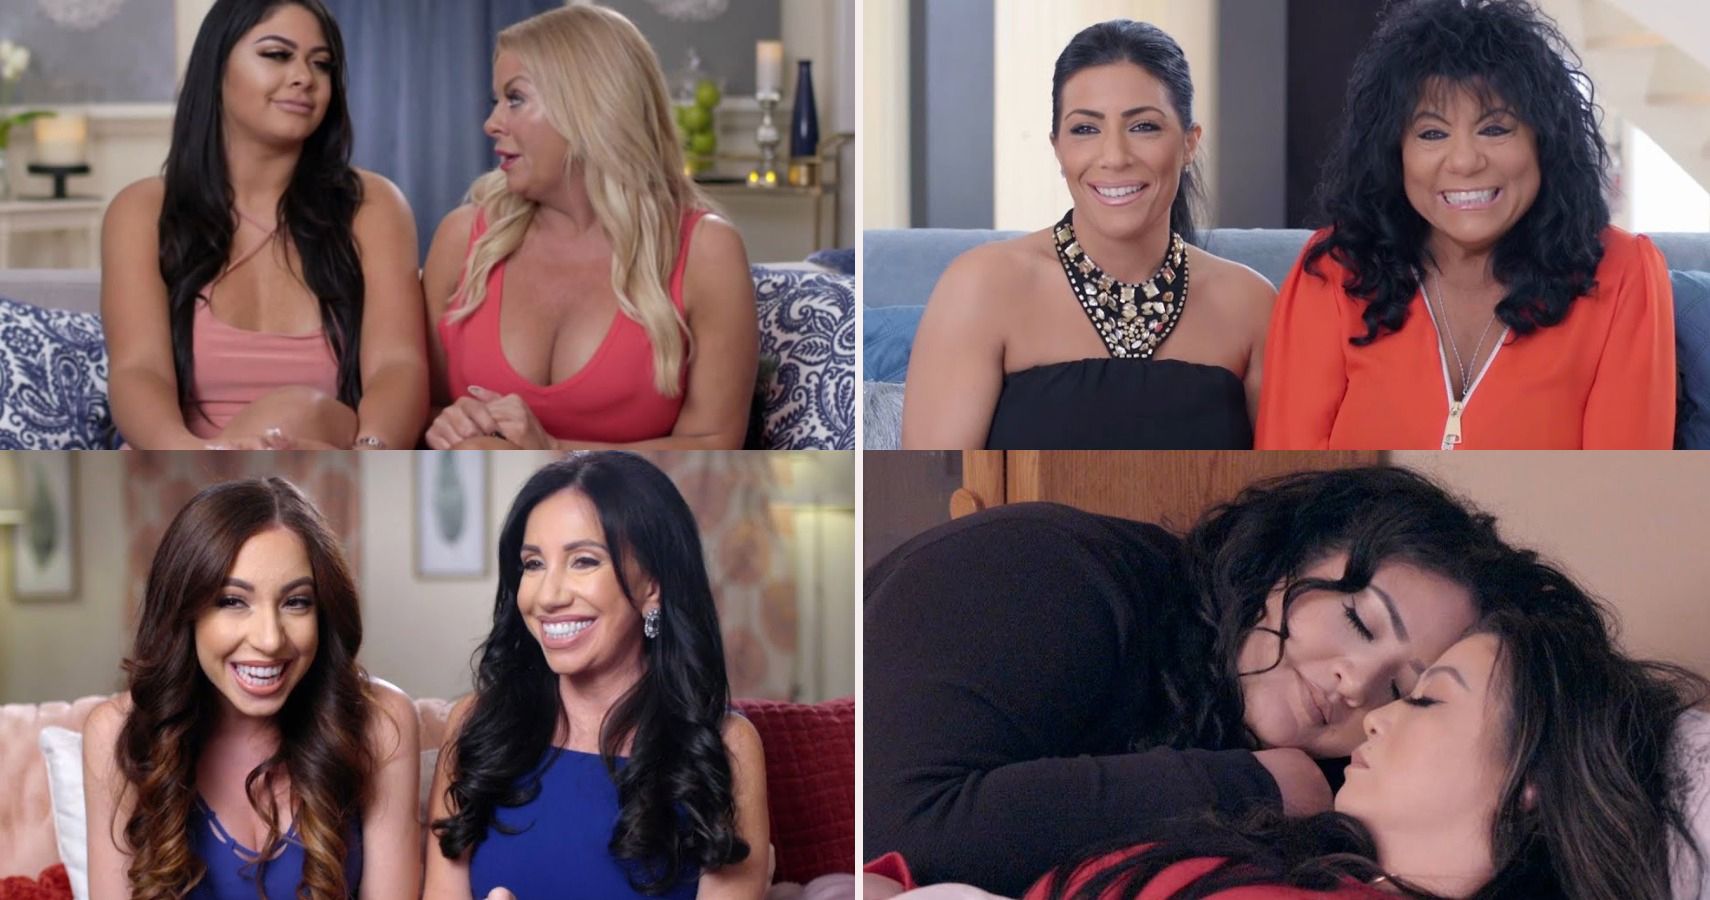 TLC's too-close-for-comfort mother/daughter relationship reality